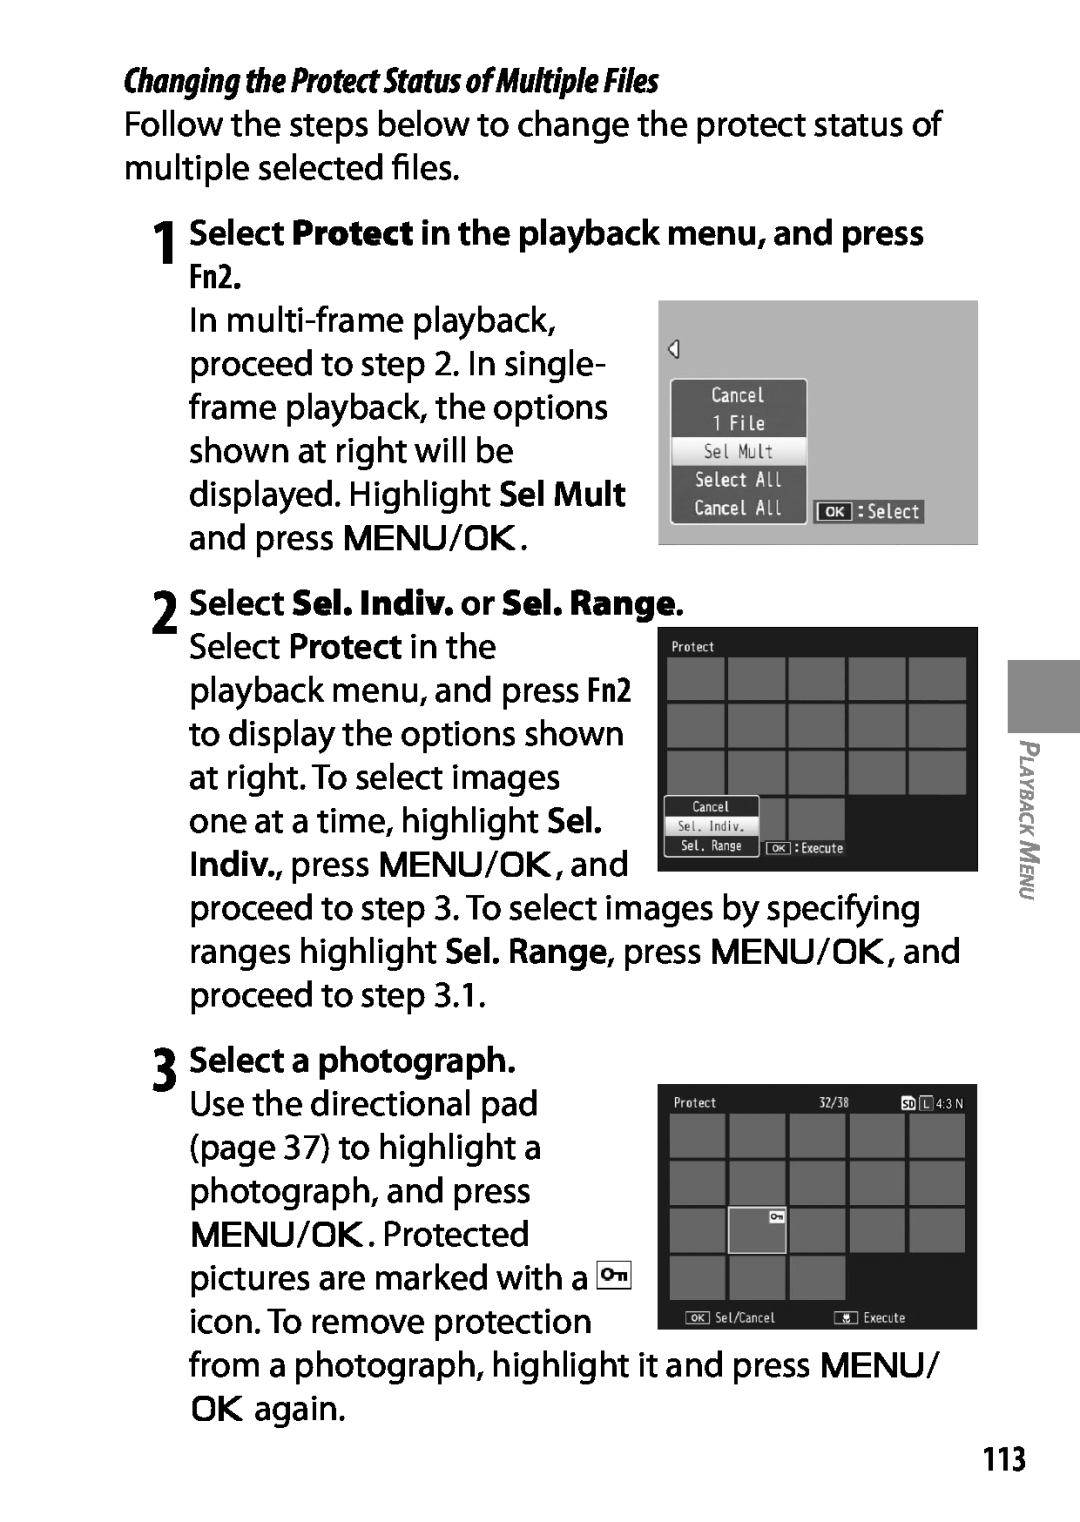 Ricoh 170553, GXR manual 1 Select Protect in the playback menu, and press Fn2, Use the directional pad, Select a photograph 